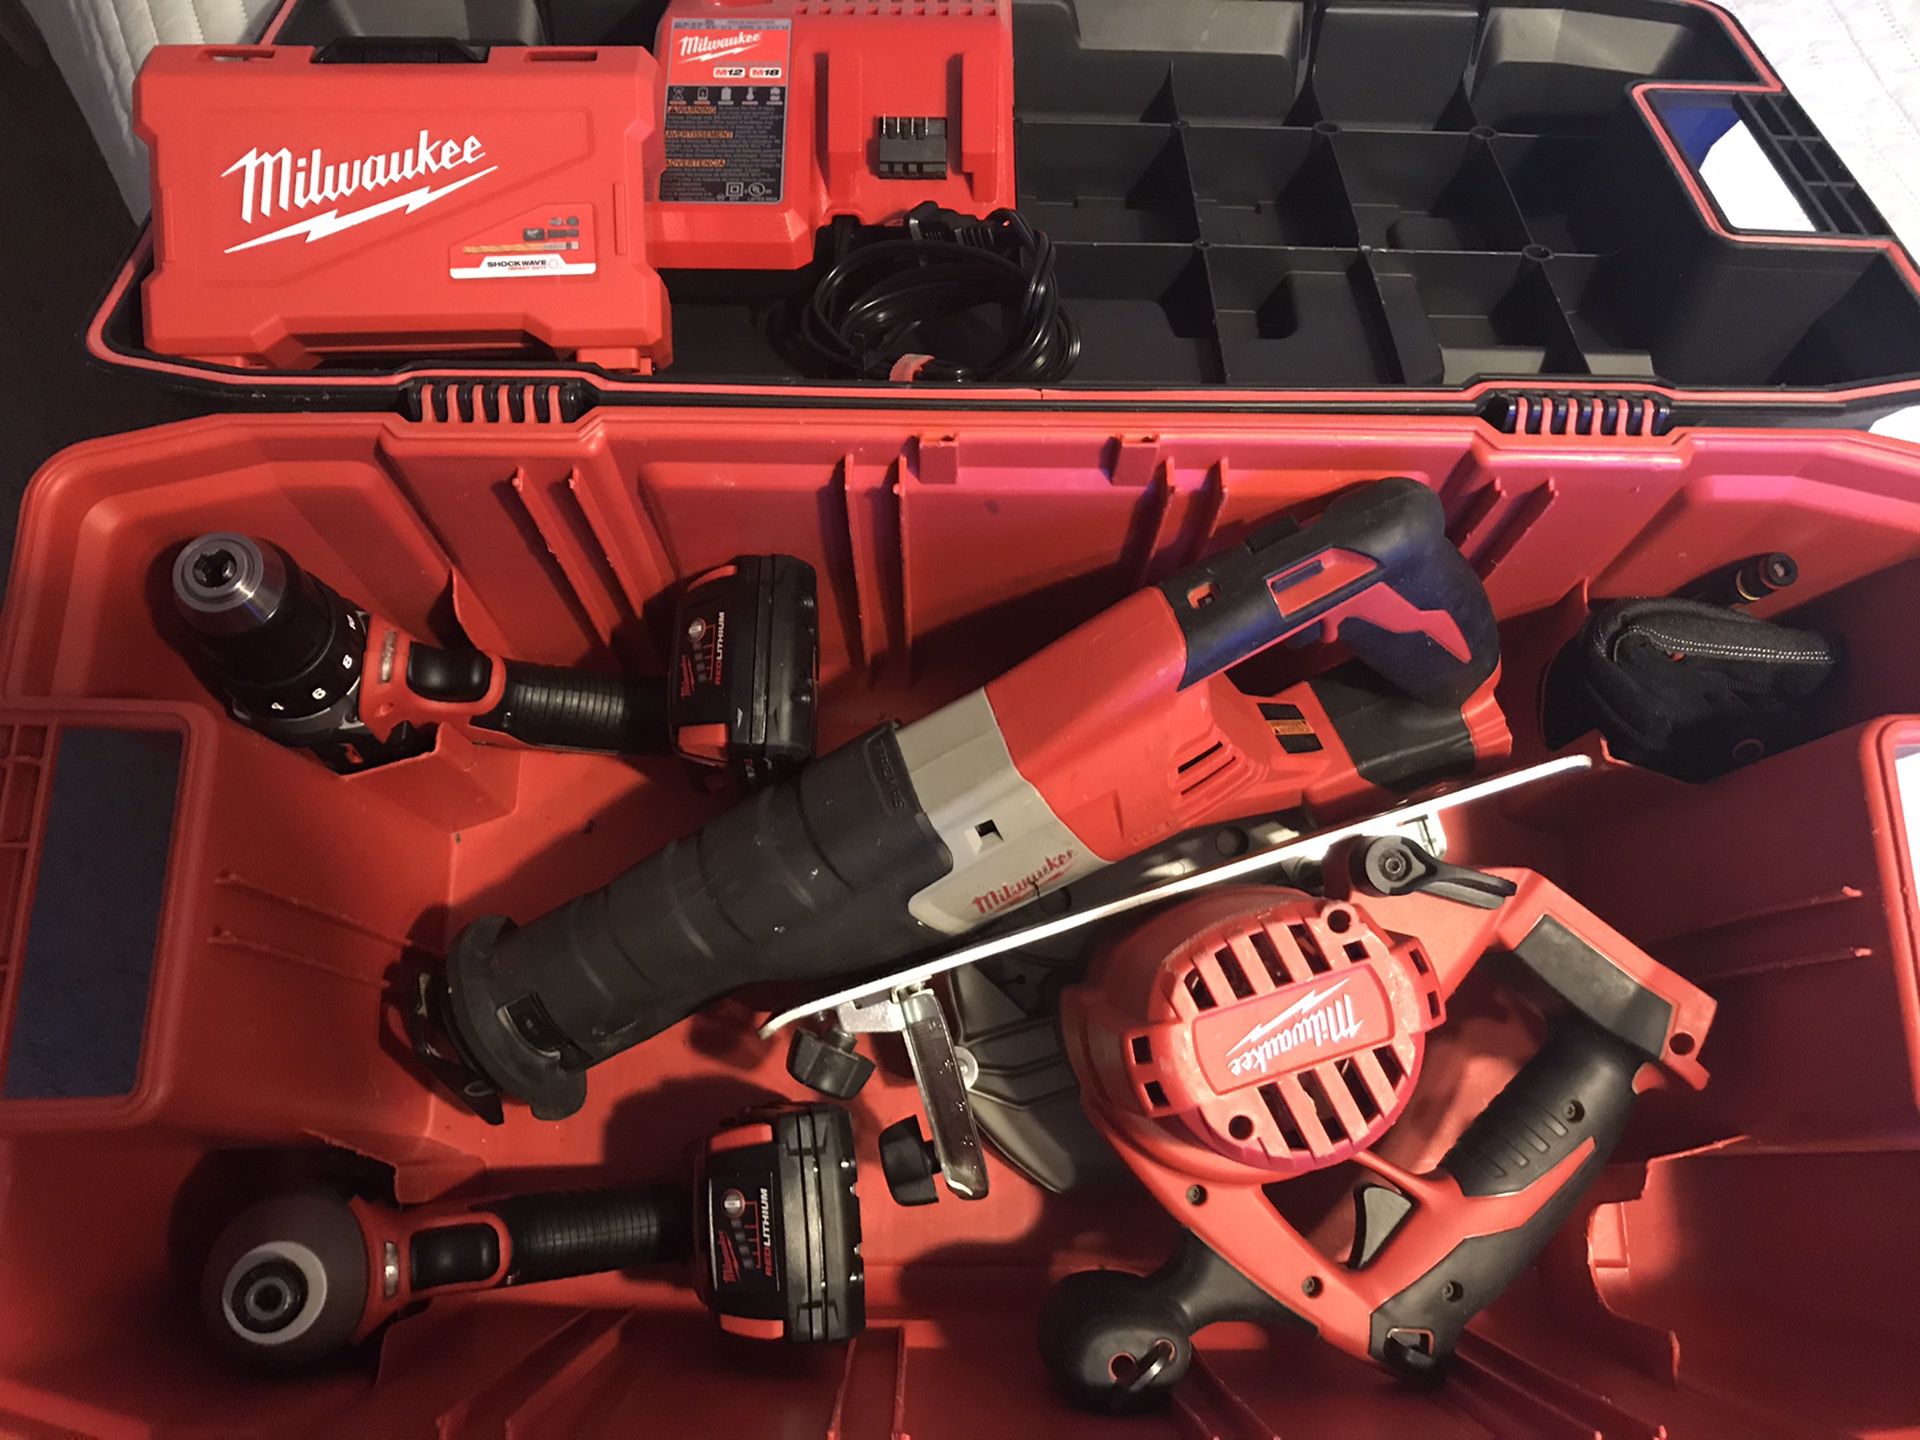 Large Milwaukee M18 power tool set (see inside great deal) 400.00